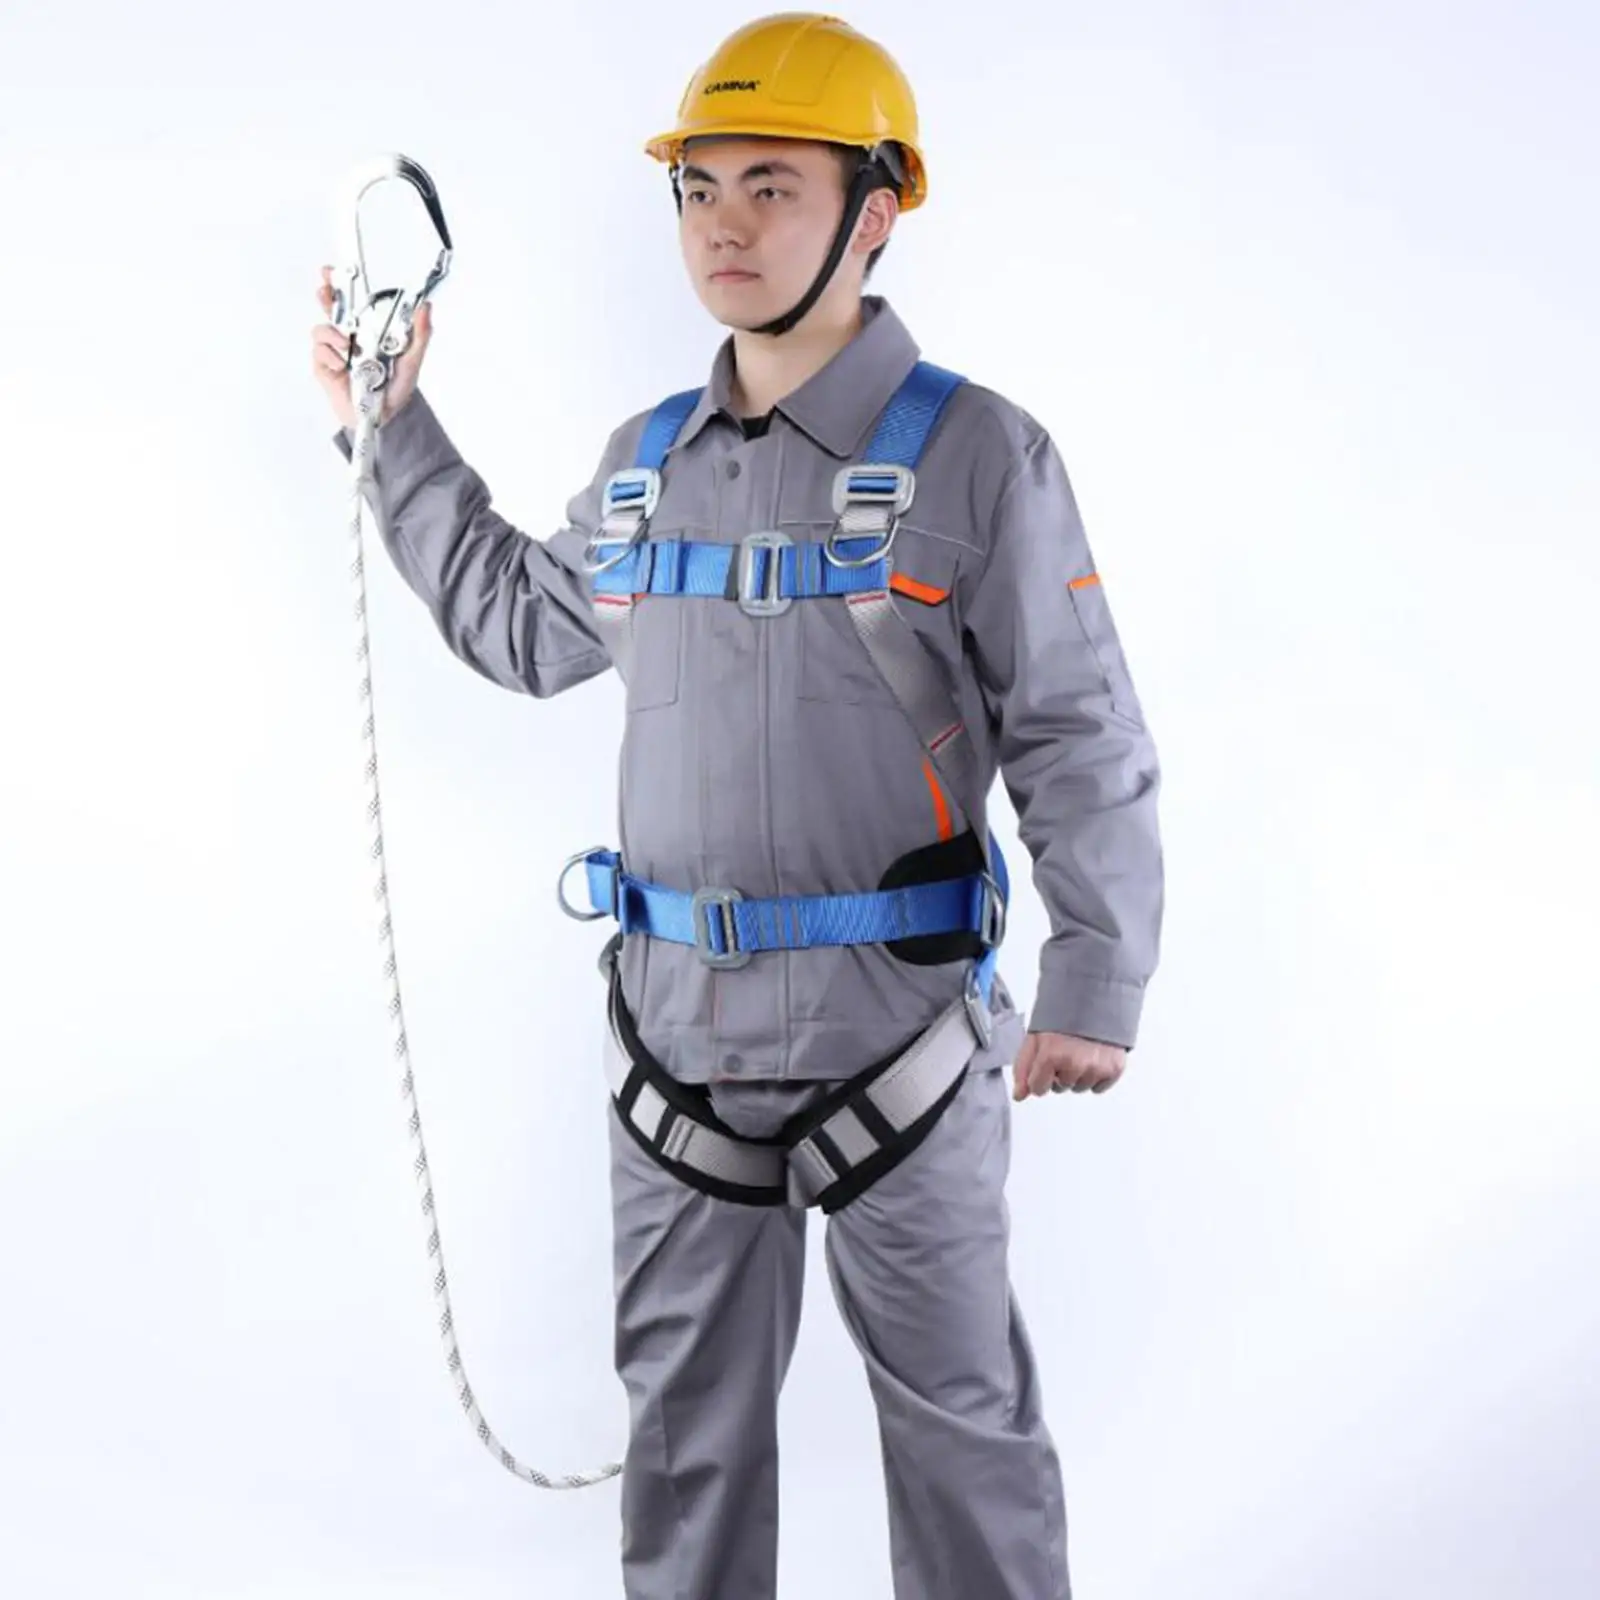 Outdoor Full Body Rock Climbing Harness Harness Belt Fall Protection for